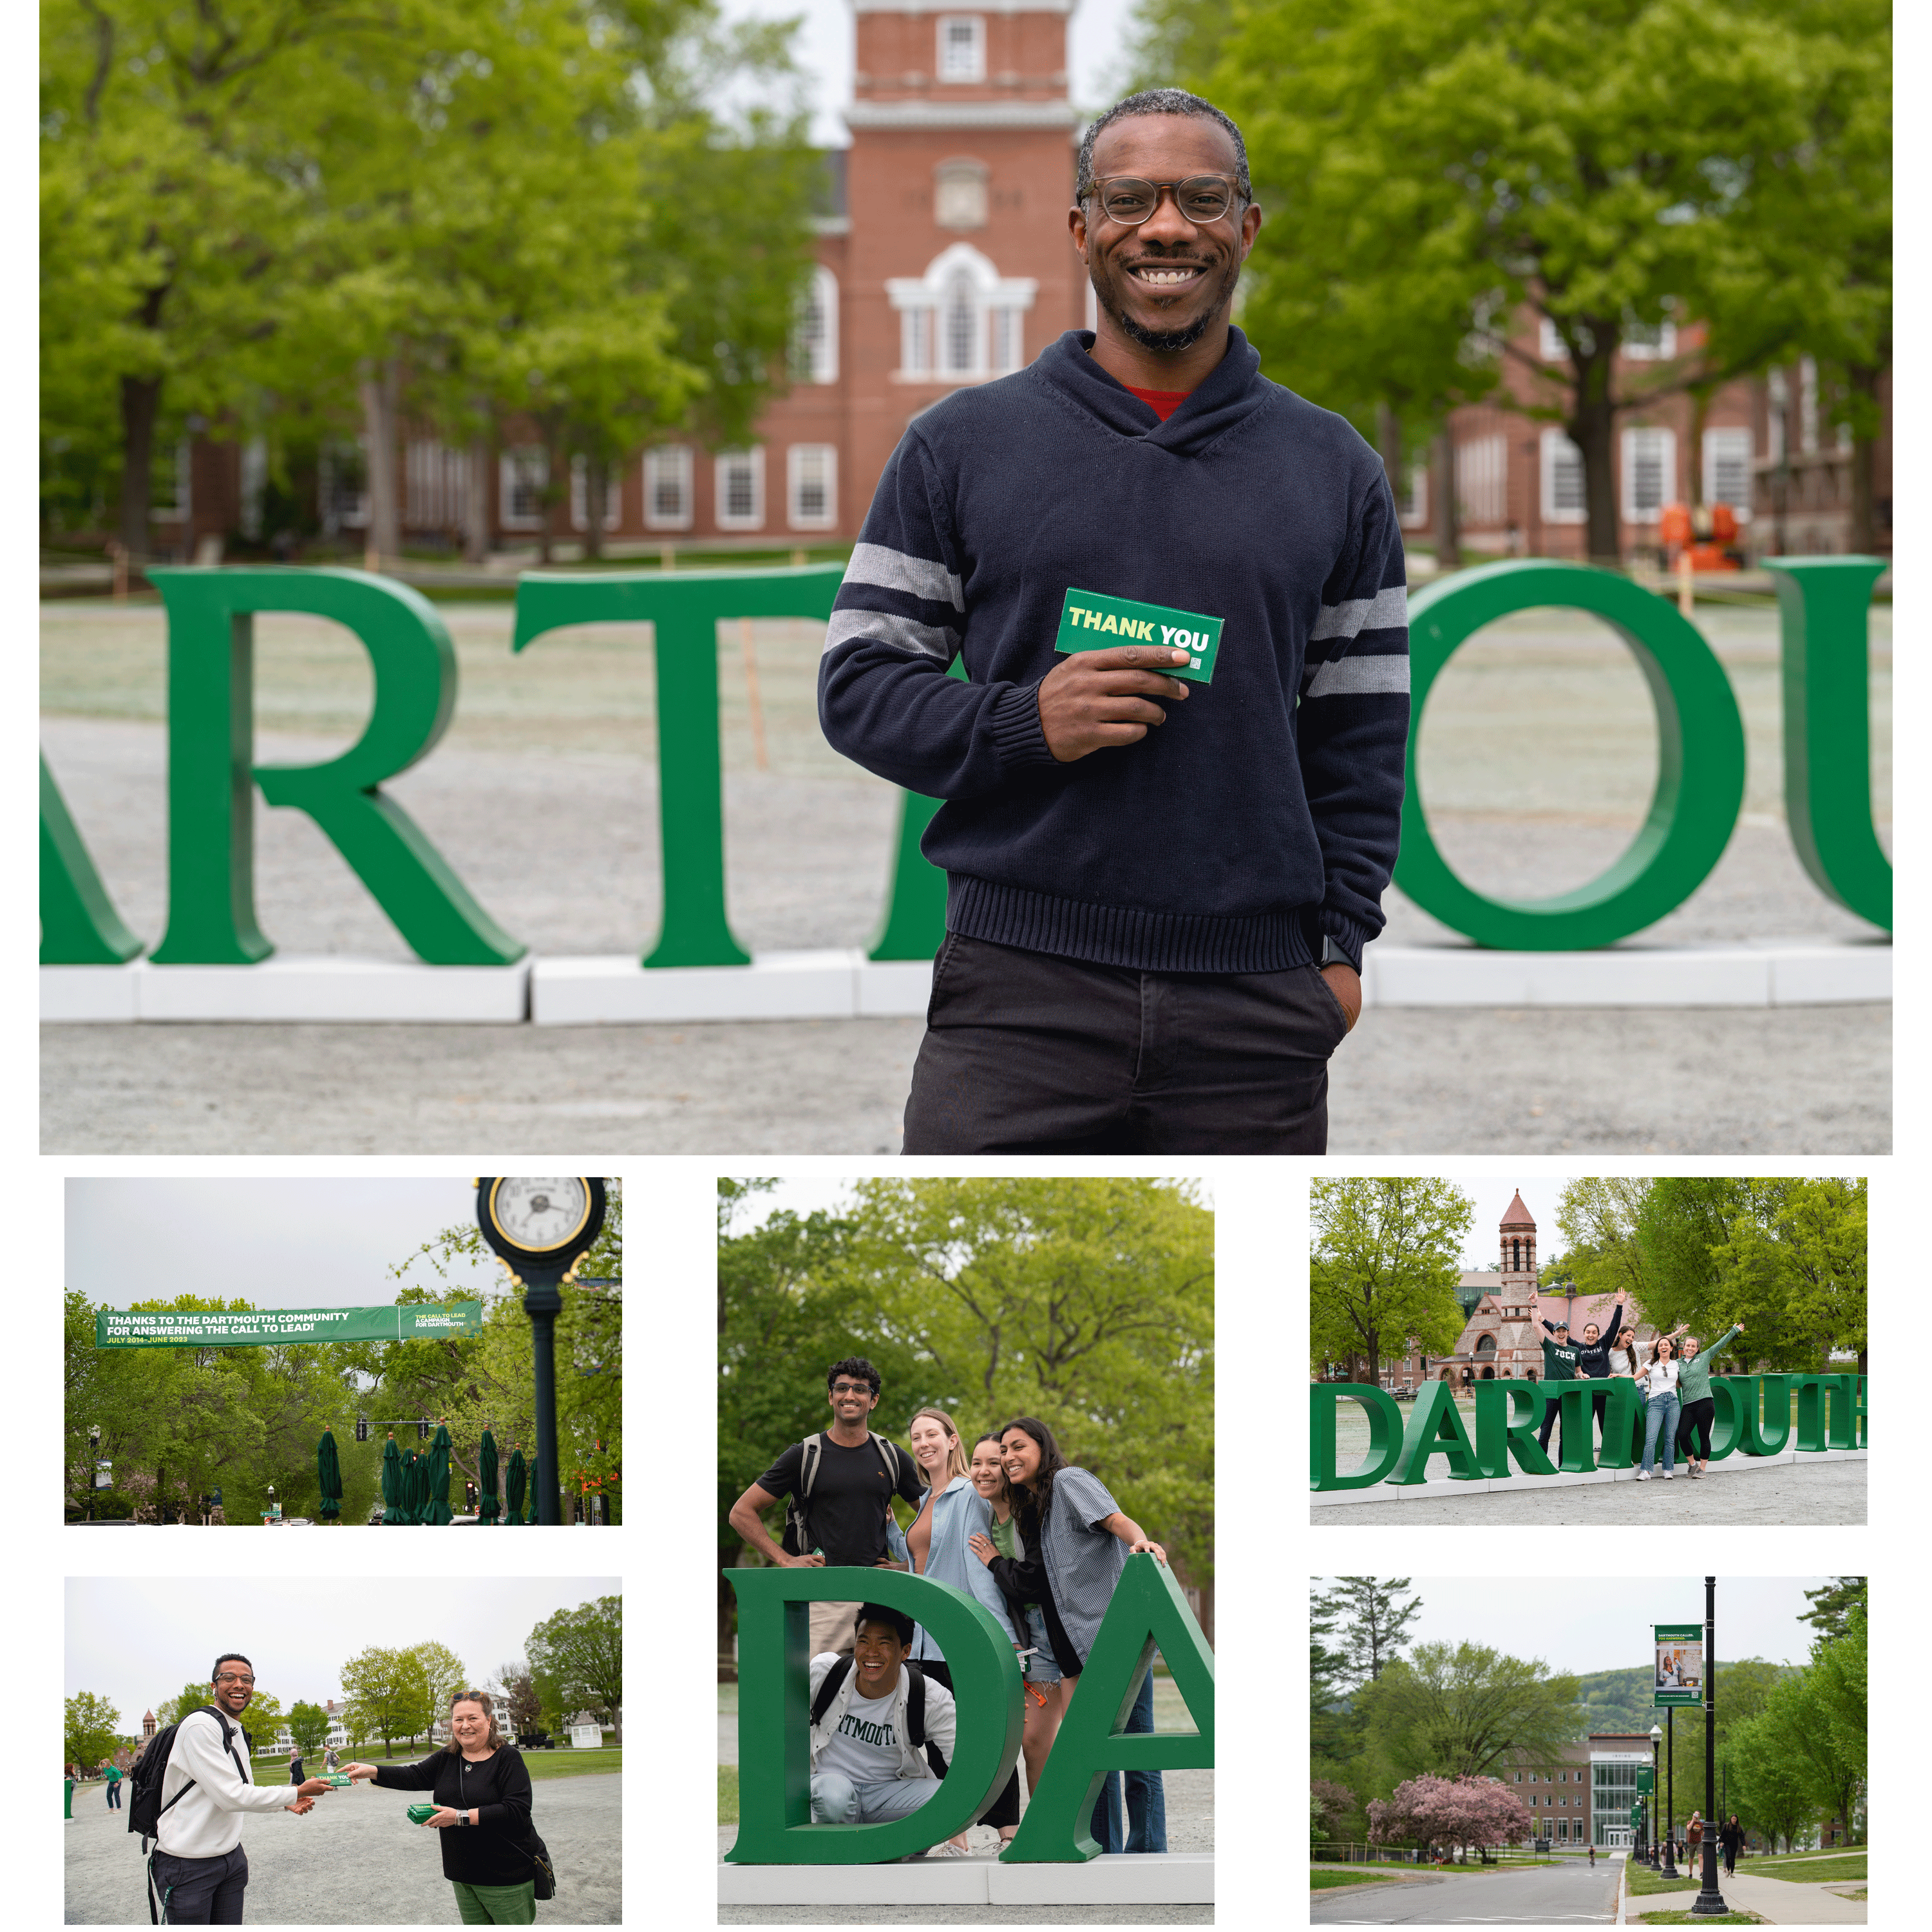 A collage of photos of students in front of the Dartmouth letters